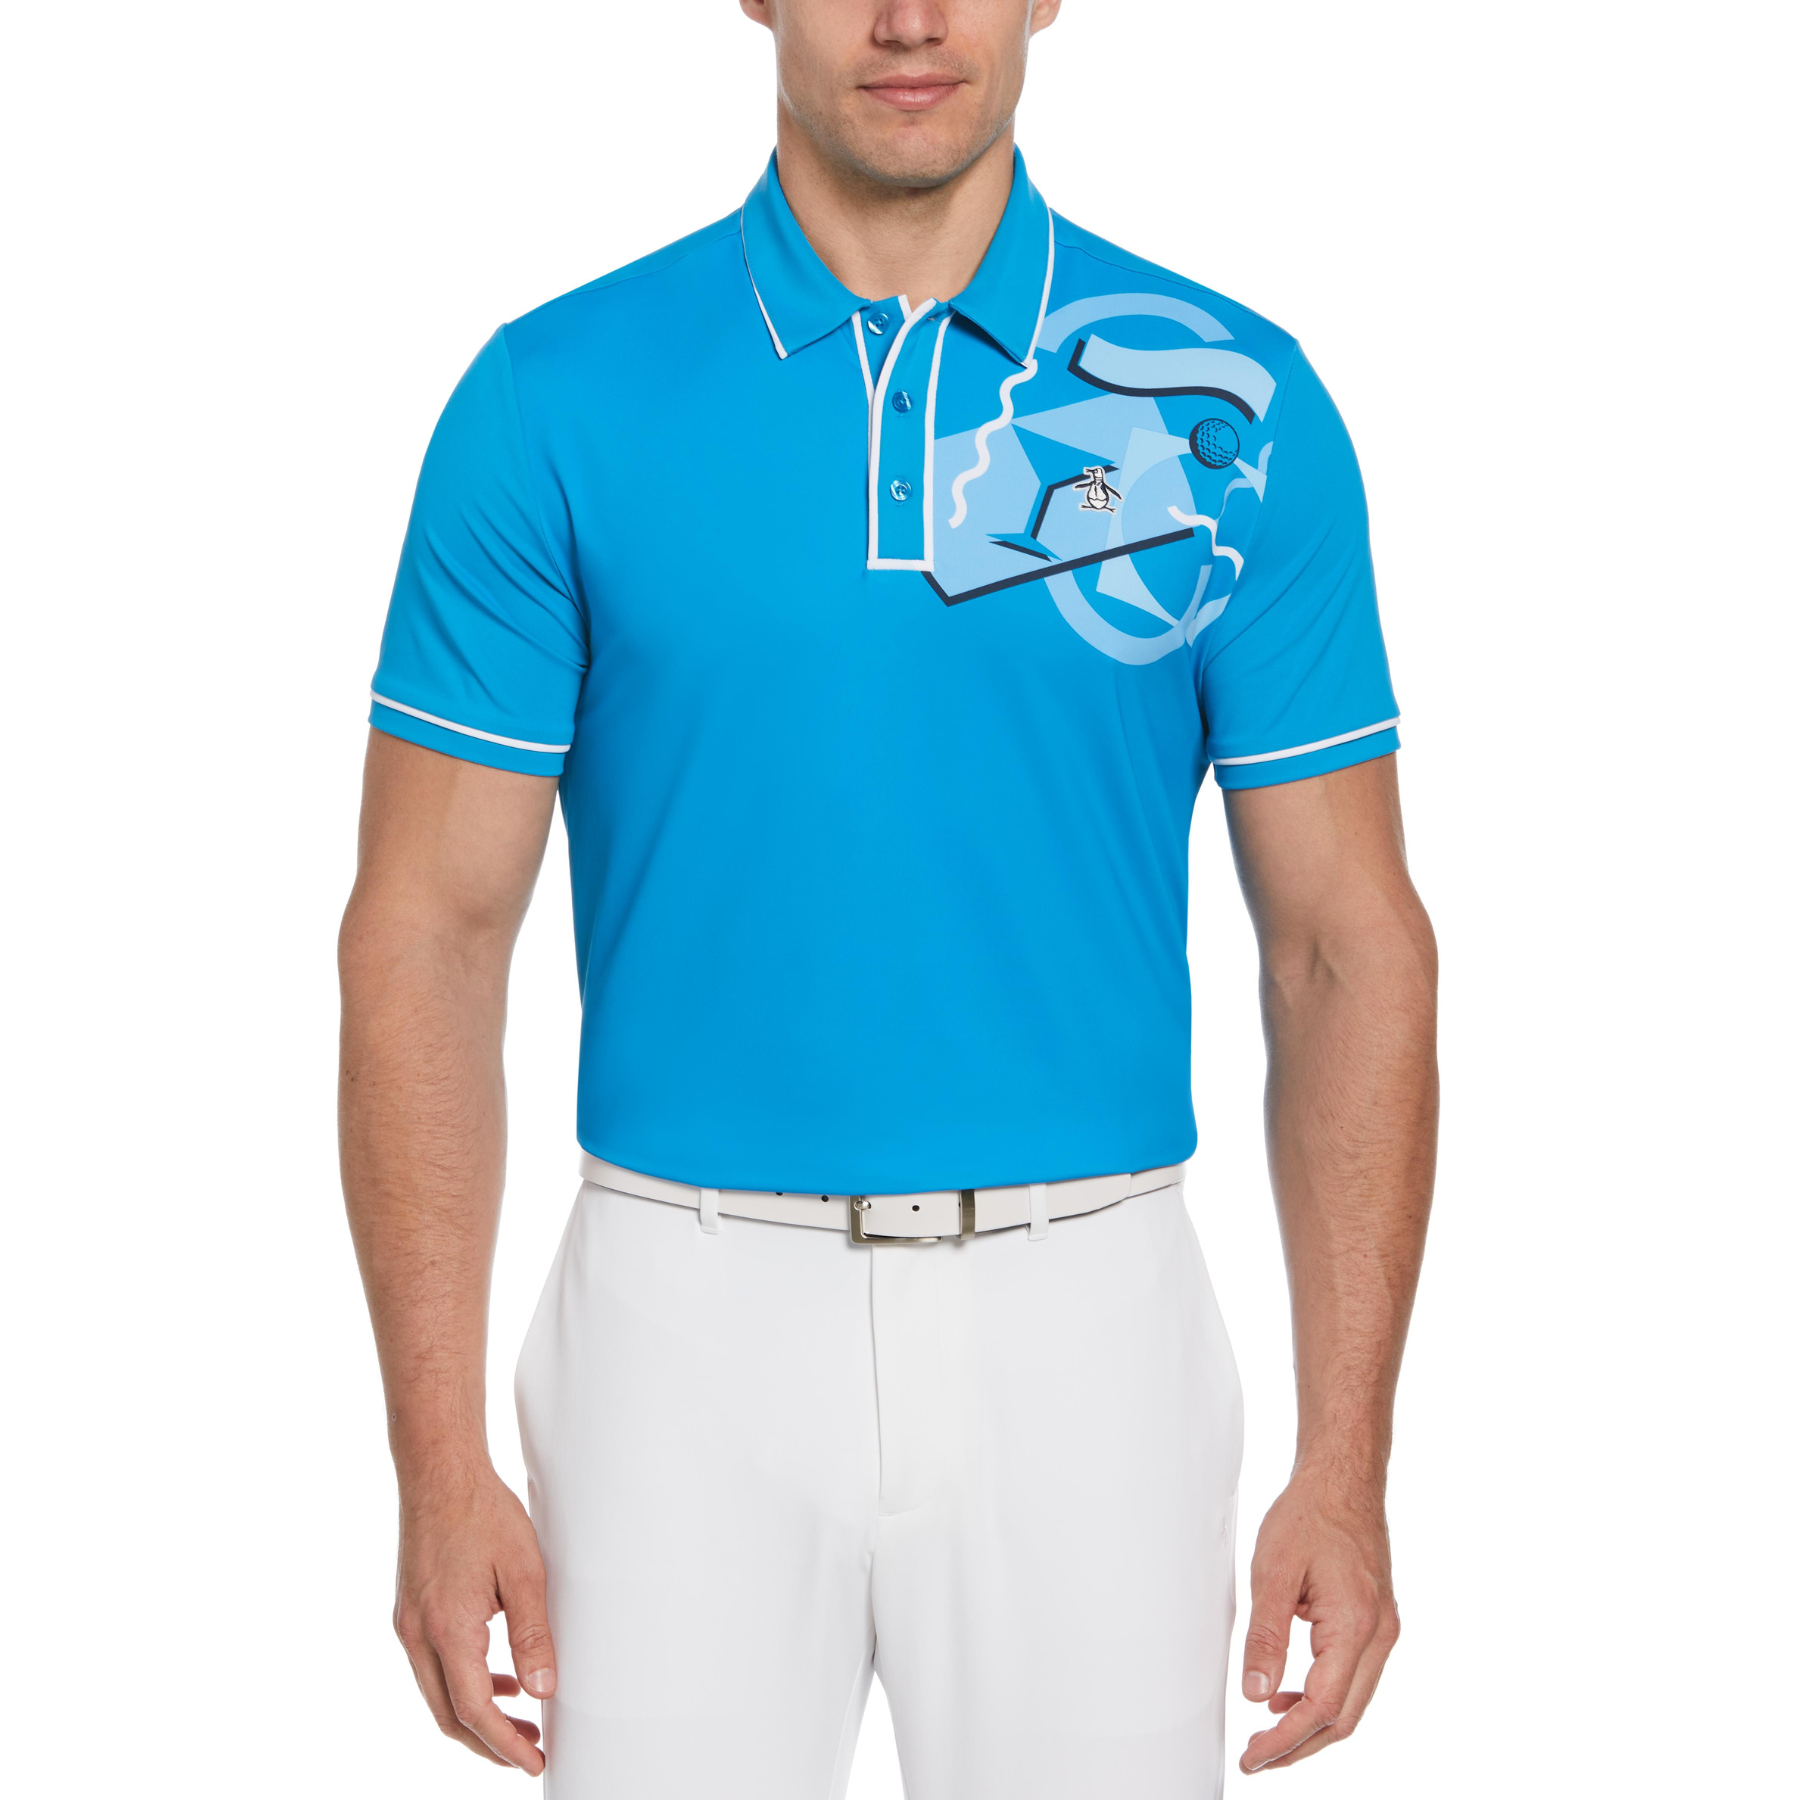 View Short Sleeve 80s Engineered Earl Golf Polo Shirt In Blue Jewel information